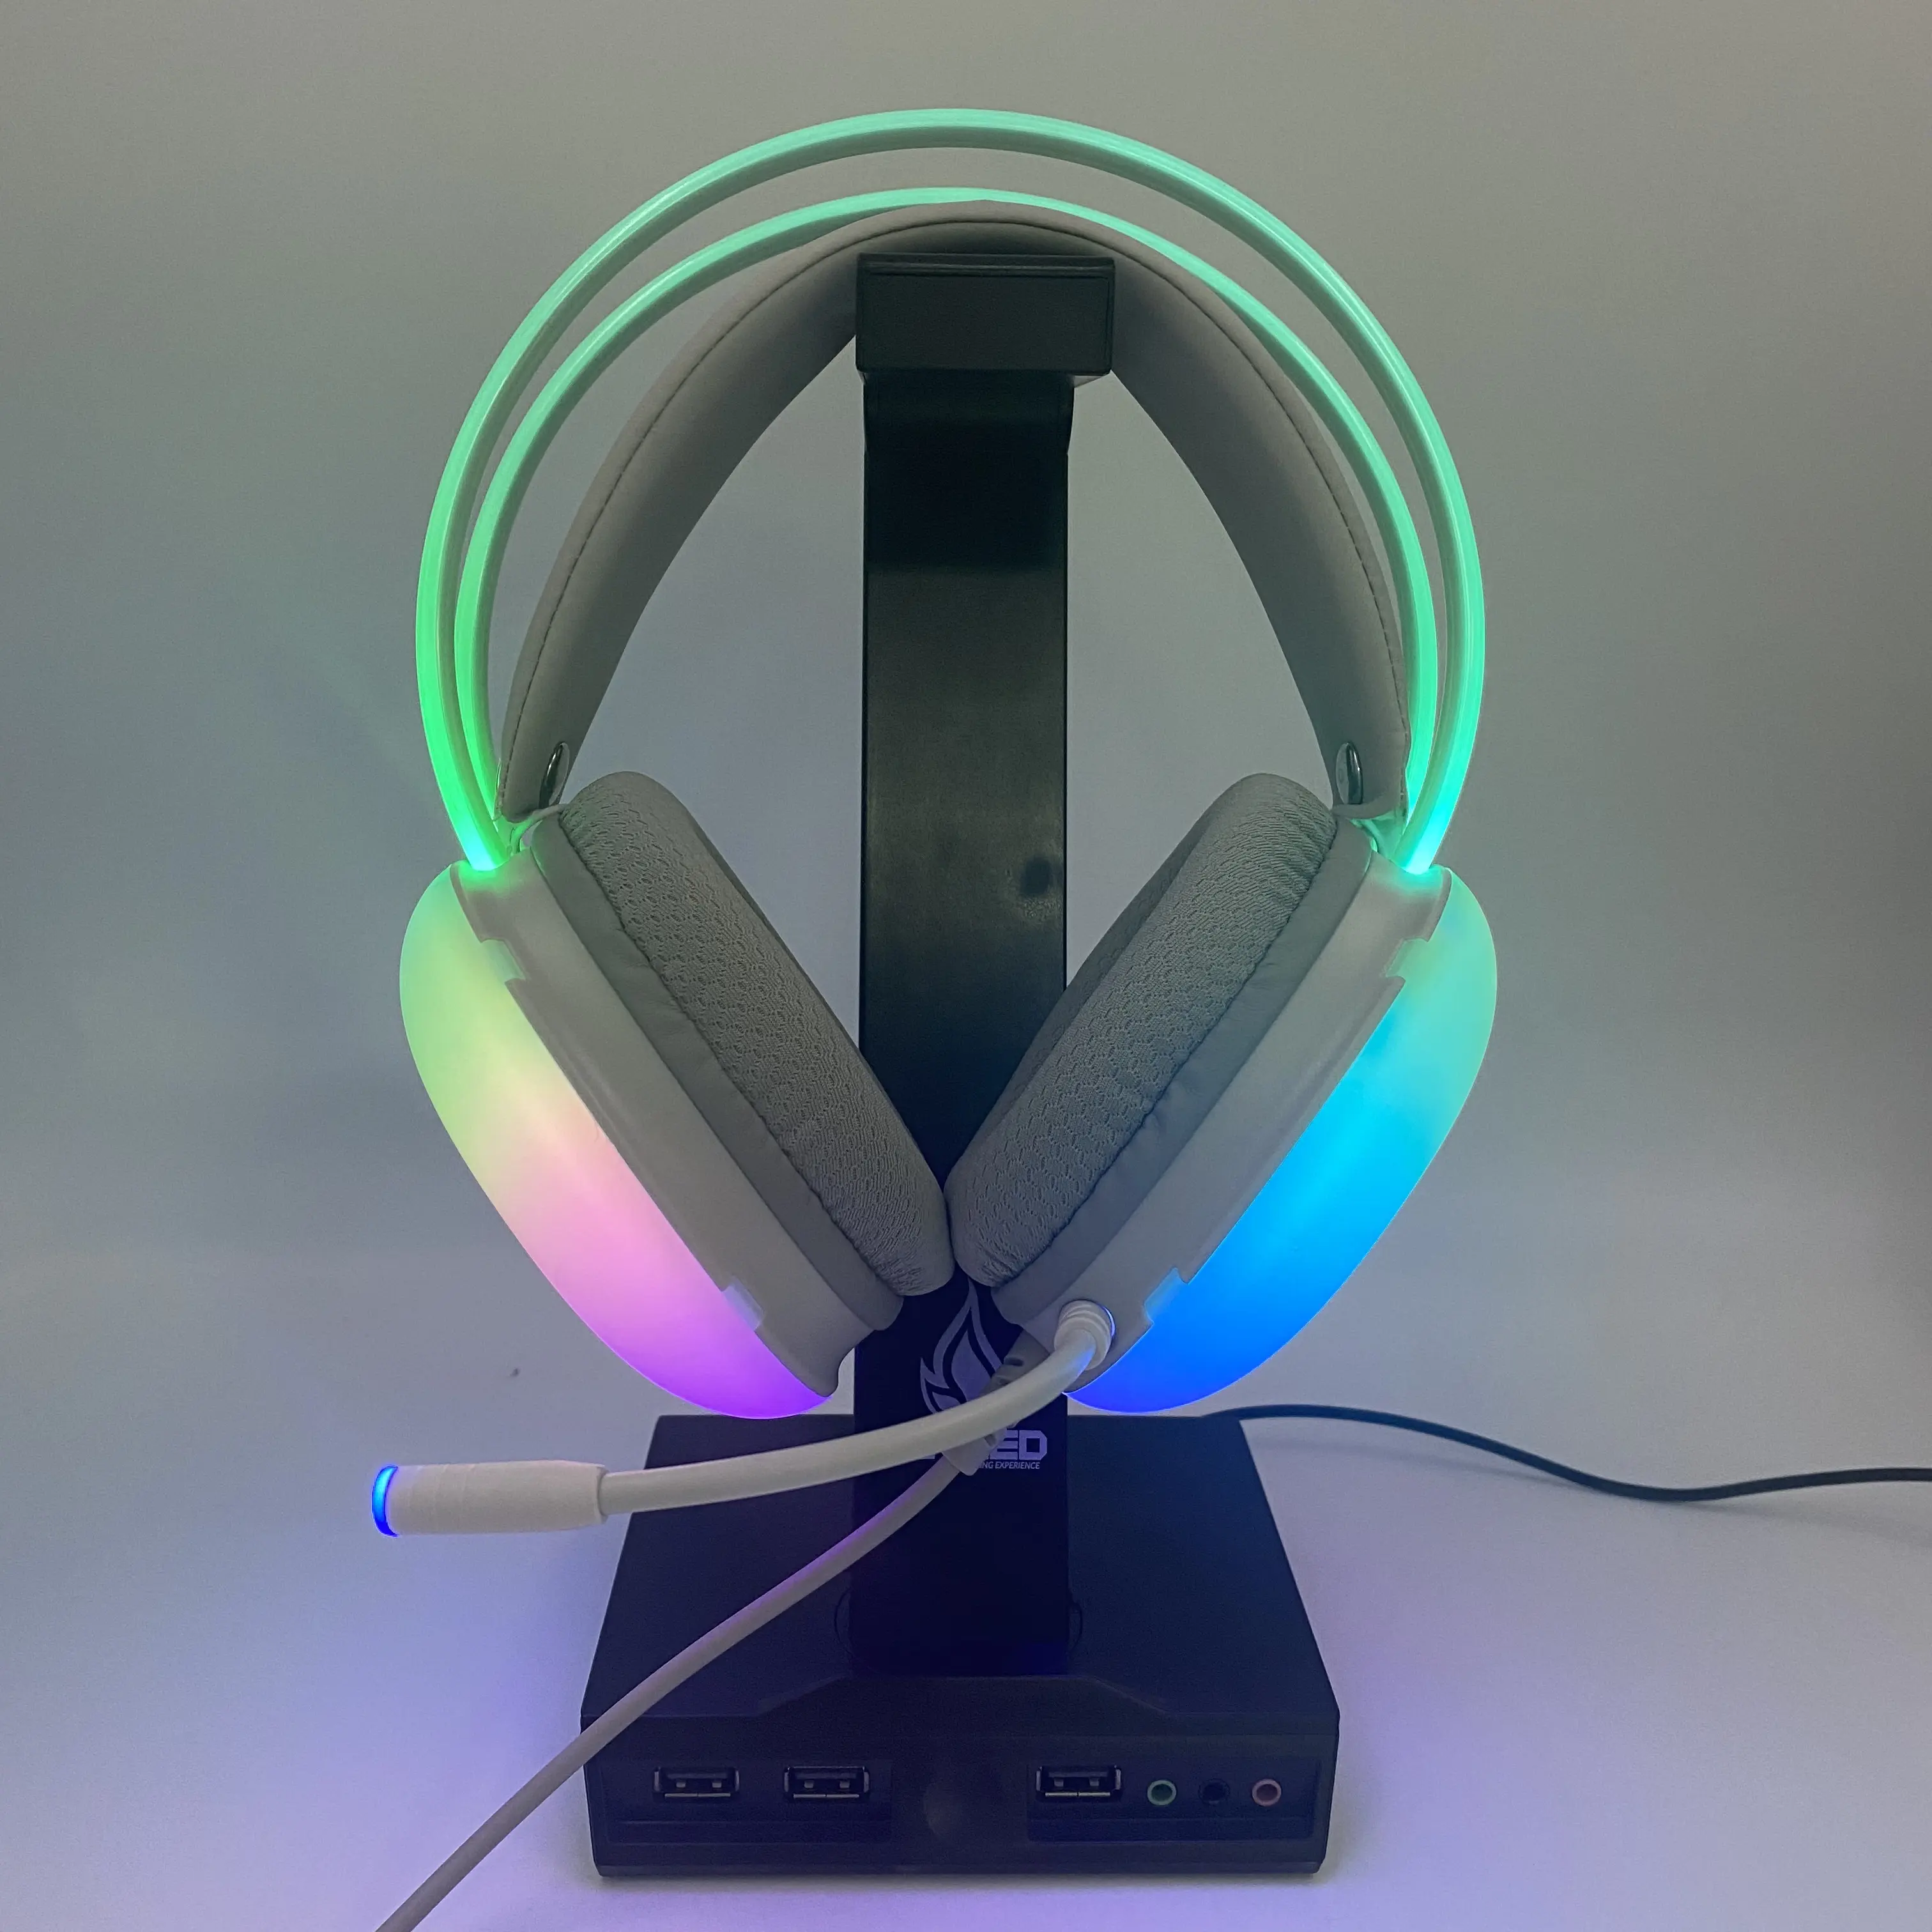 New Arrival LED Gaming Headset USB Wired Headphone For PC Computer Laptop Gamer With LED Headband